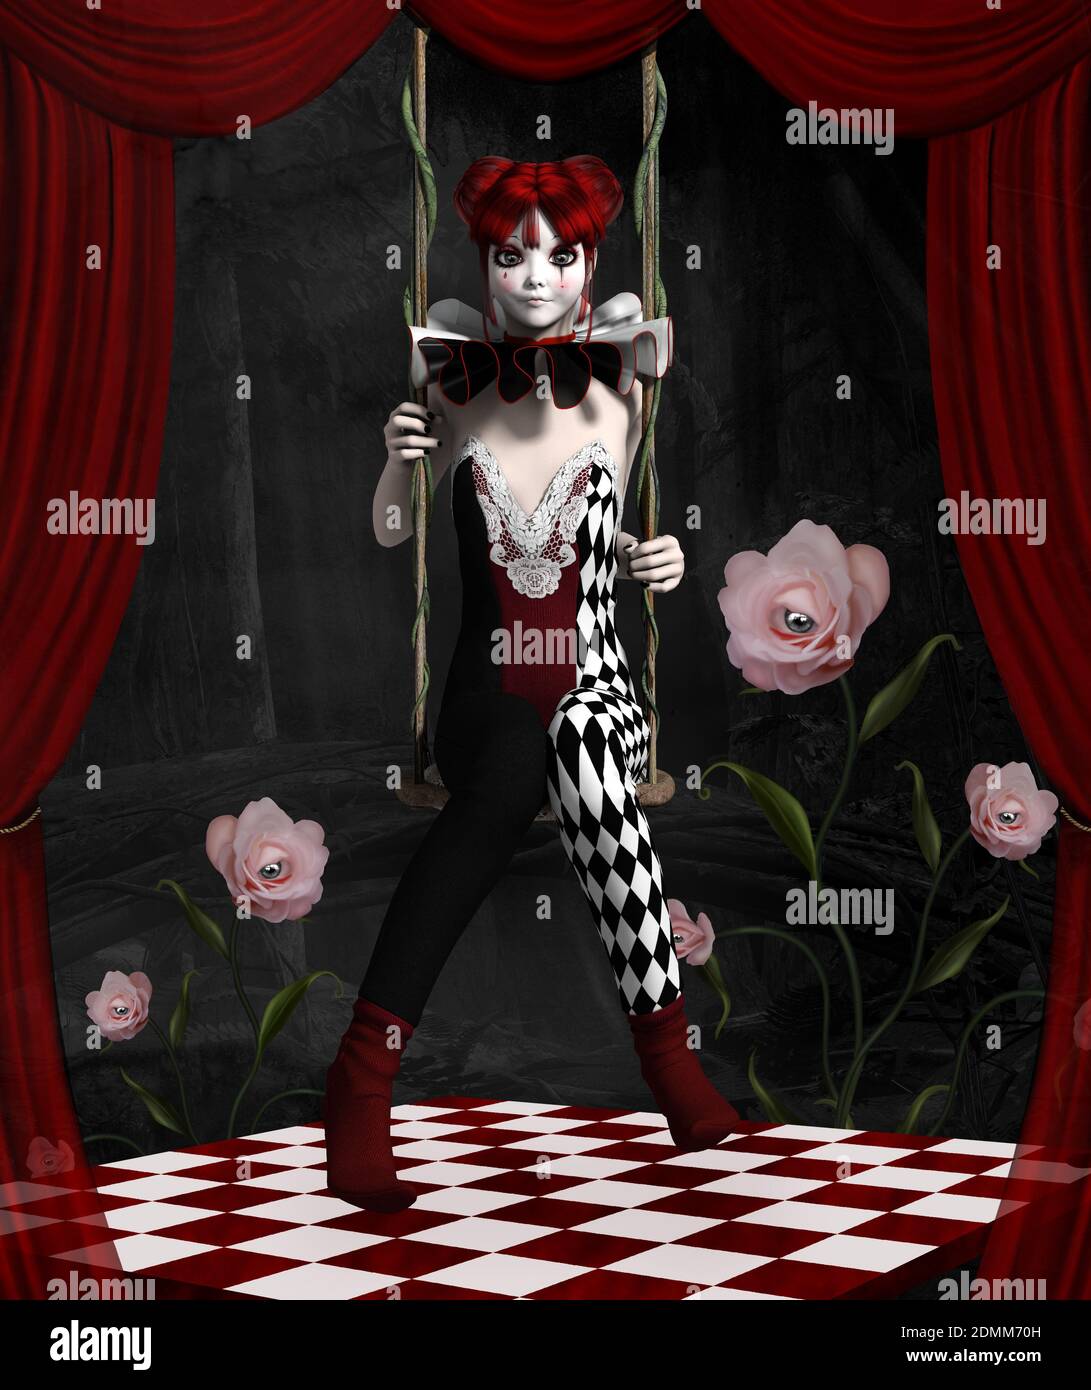 Young clown and surreal roses on a red stage Stock Photo